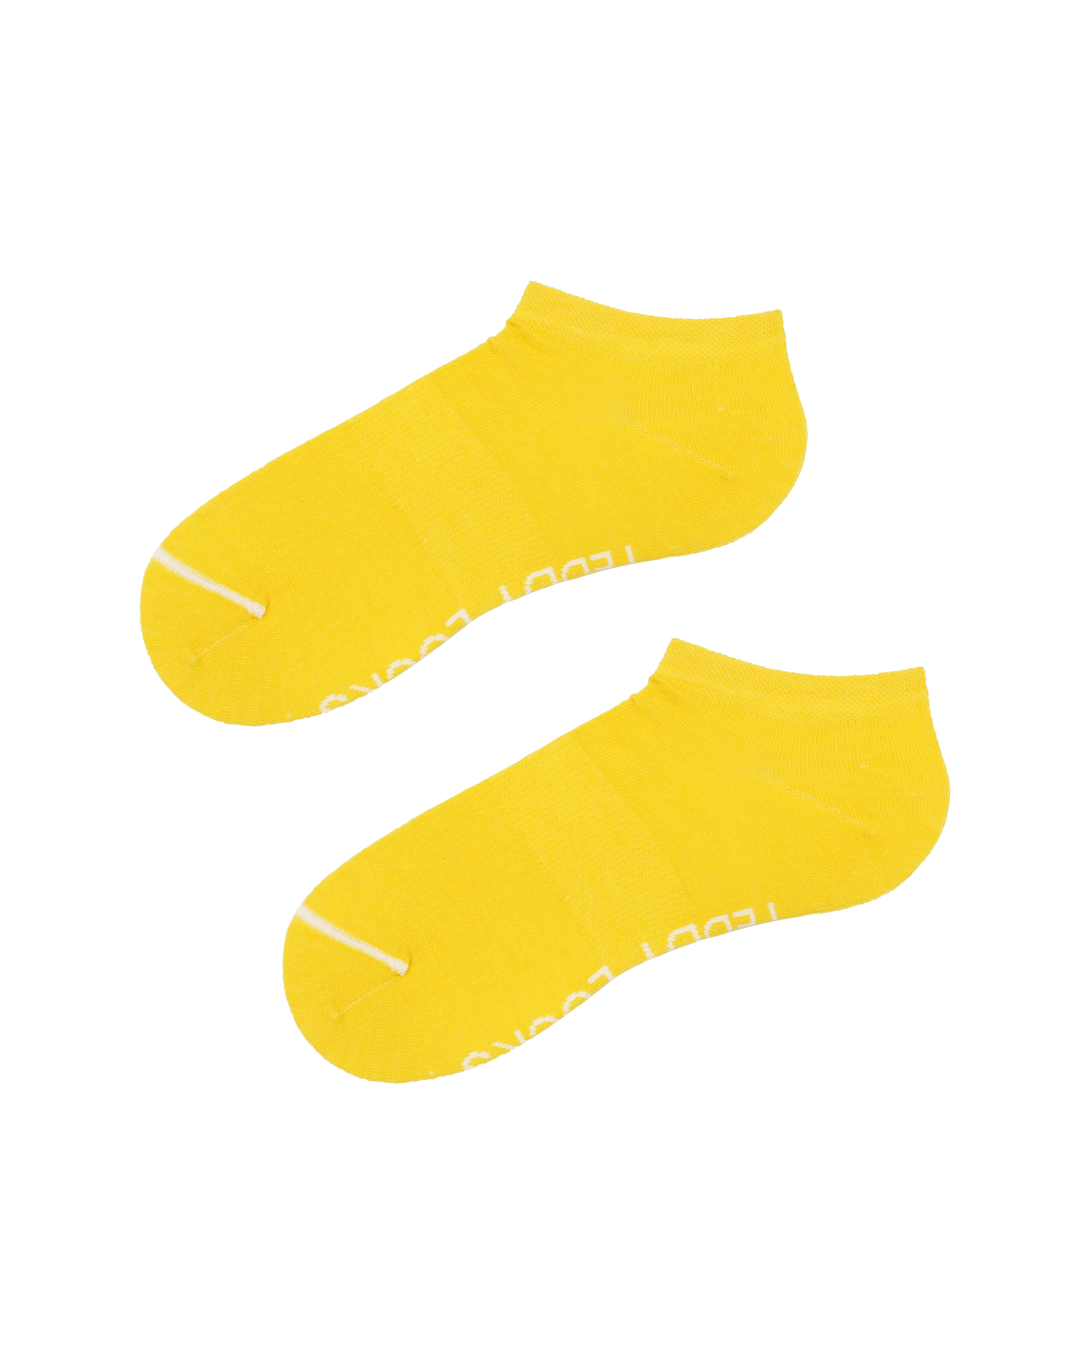 Sustainable Socks - Yellow Socks Made from Recycled Plastic – Teddy Locks